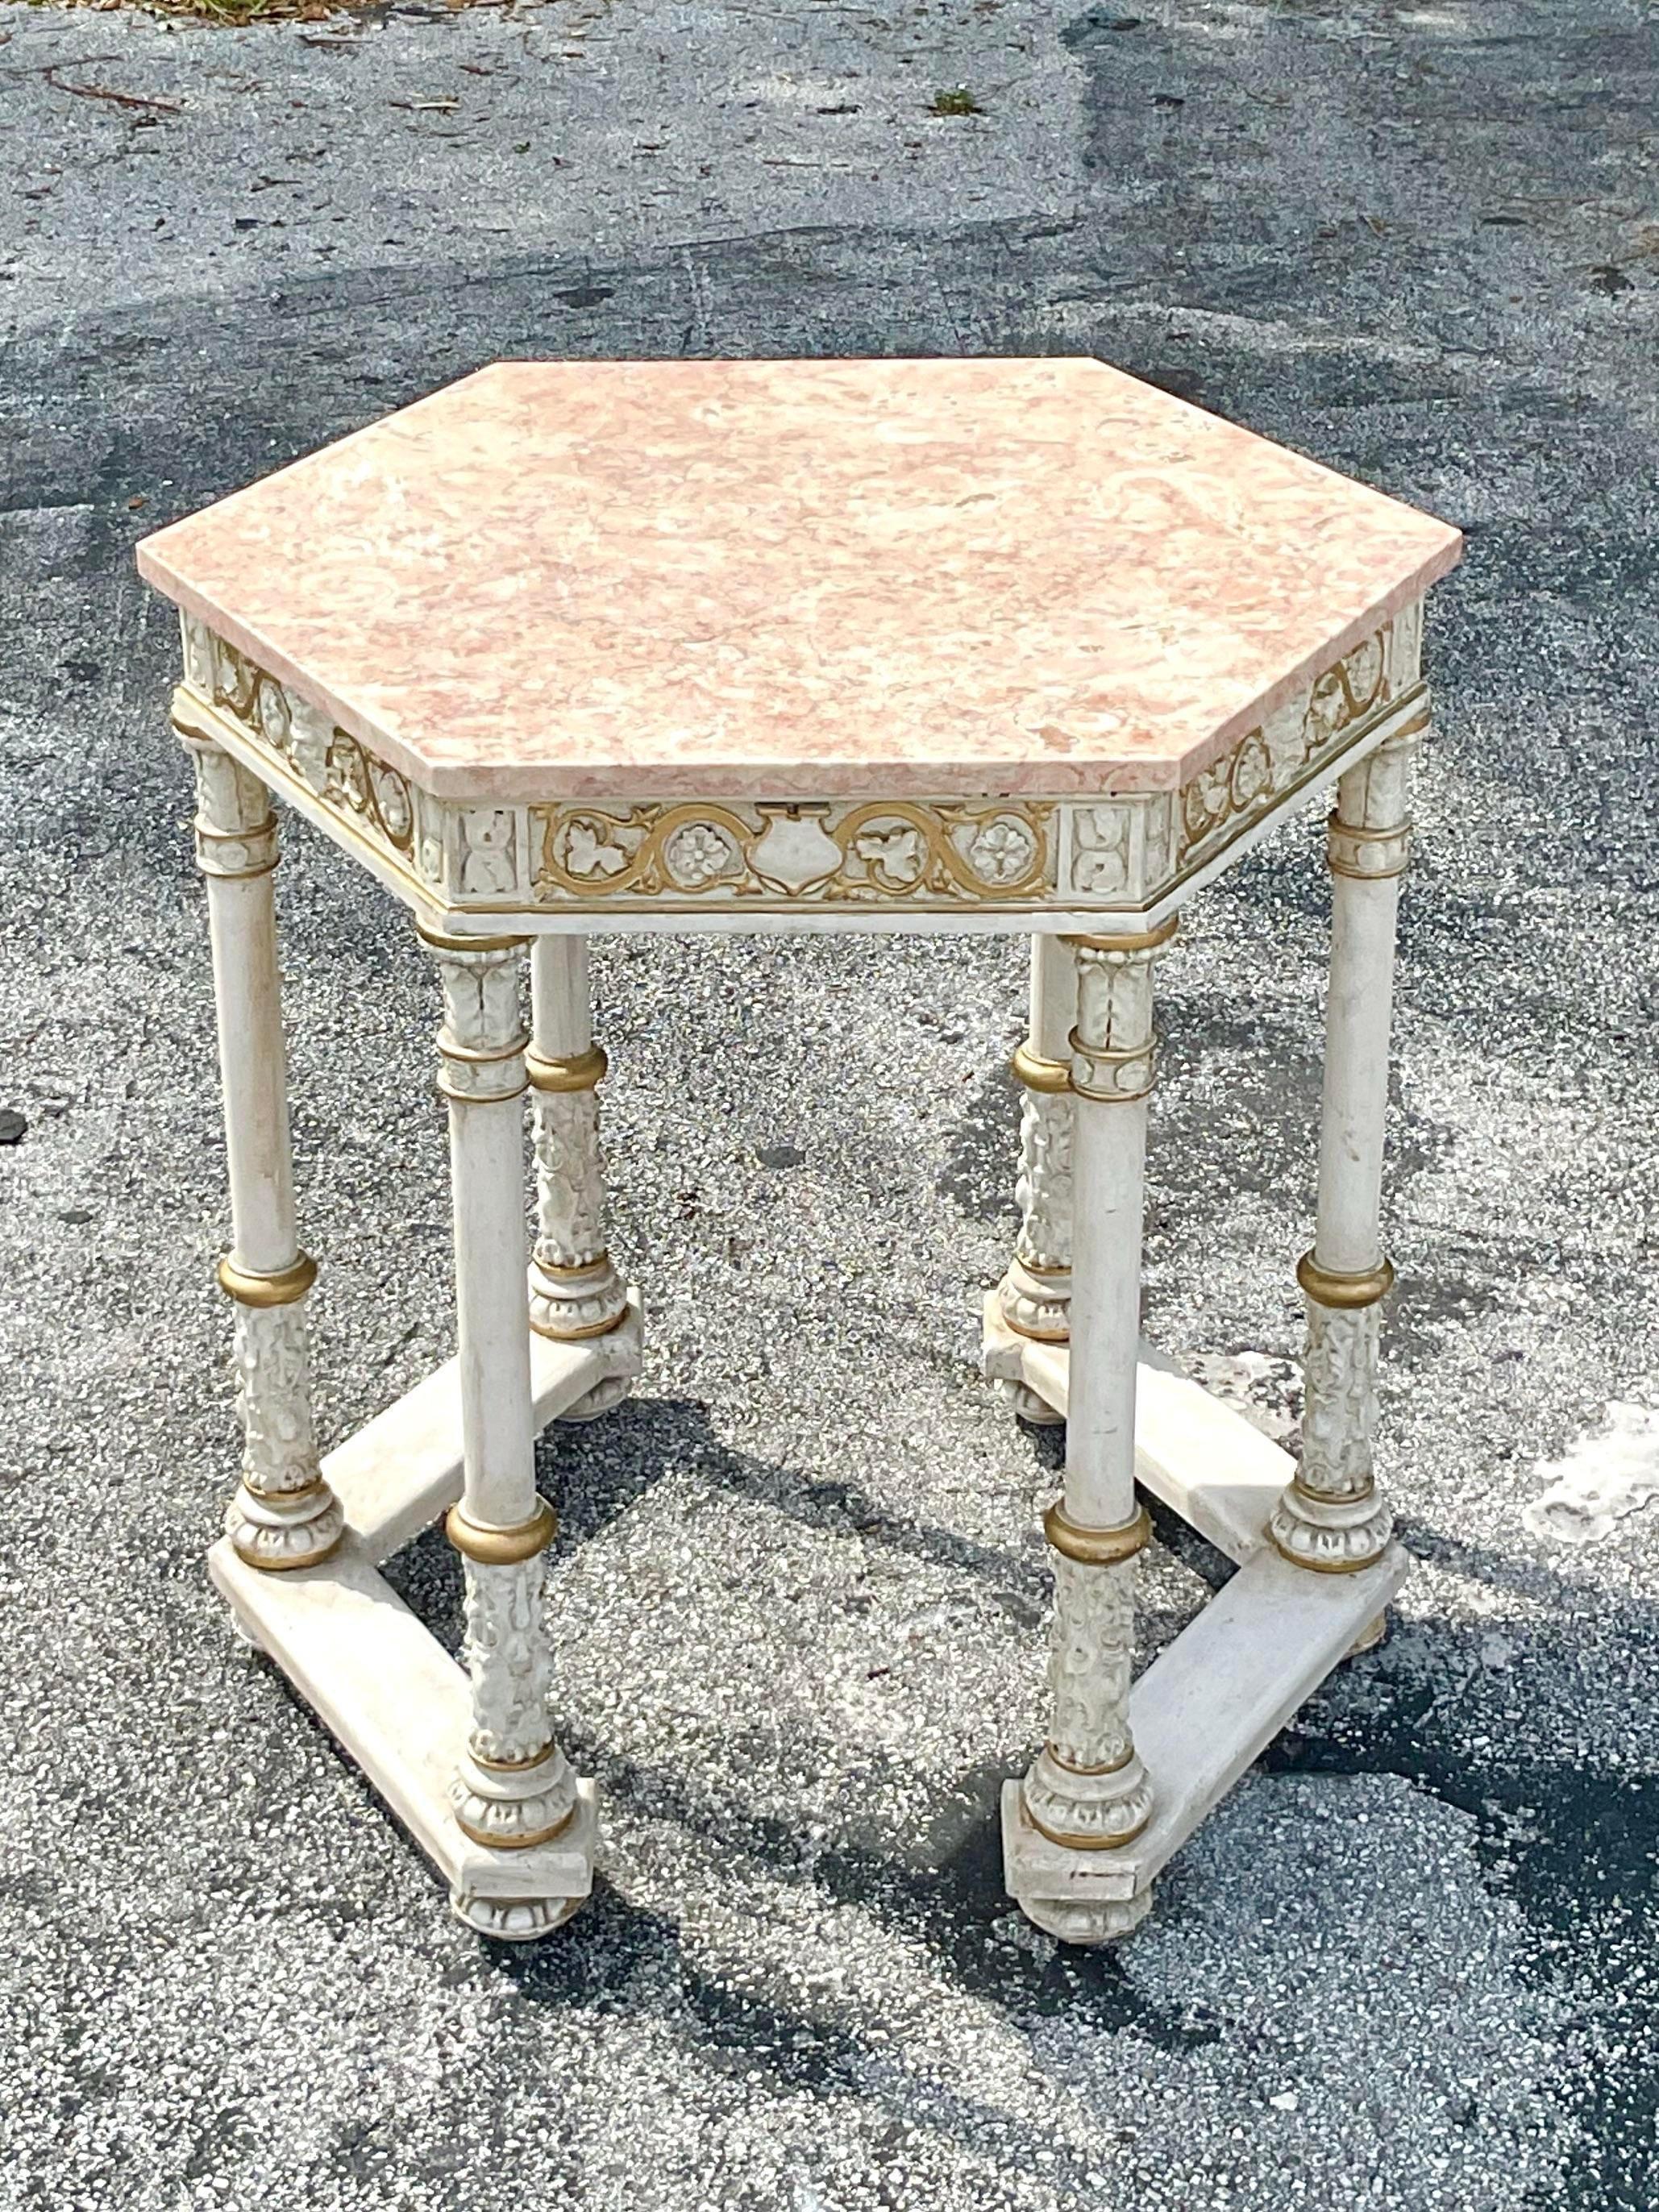 Opulent center or entry table in hexagon shape with a gorgeous rose colored marble top with an intricate carved painted base. The gilt adds an element of elegance and sophistication to elevate any entry or hall corridor. Acquired from a Palm Beach